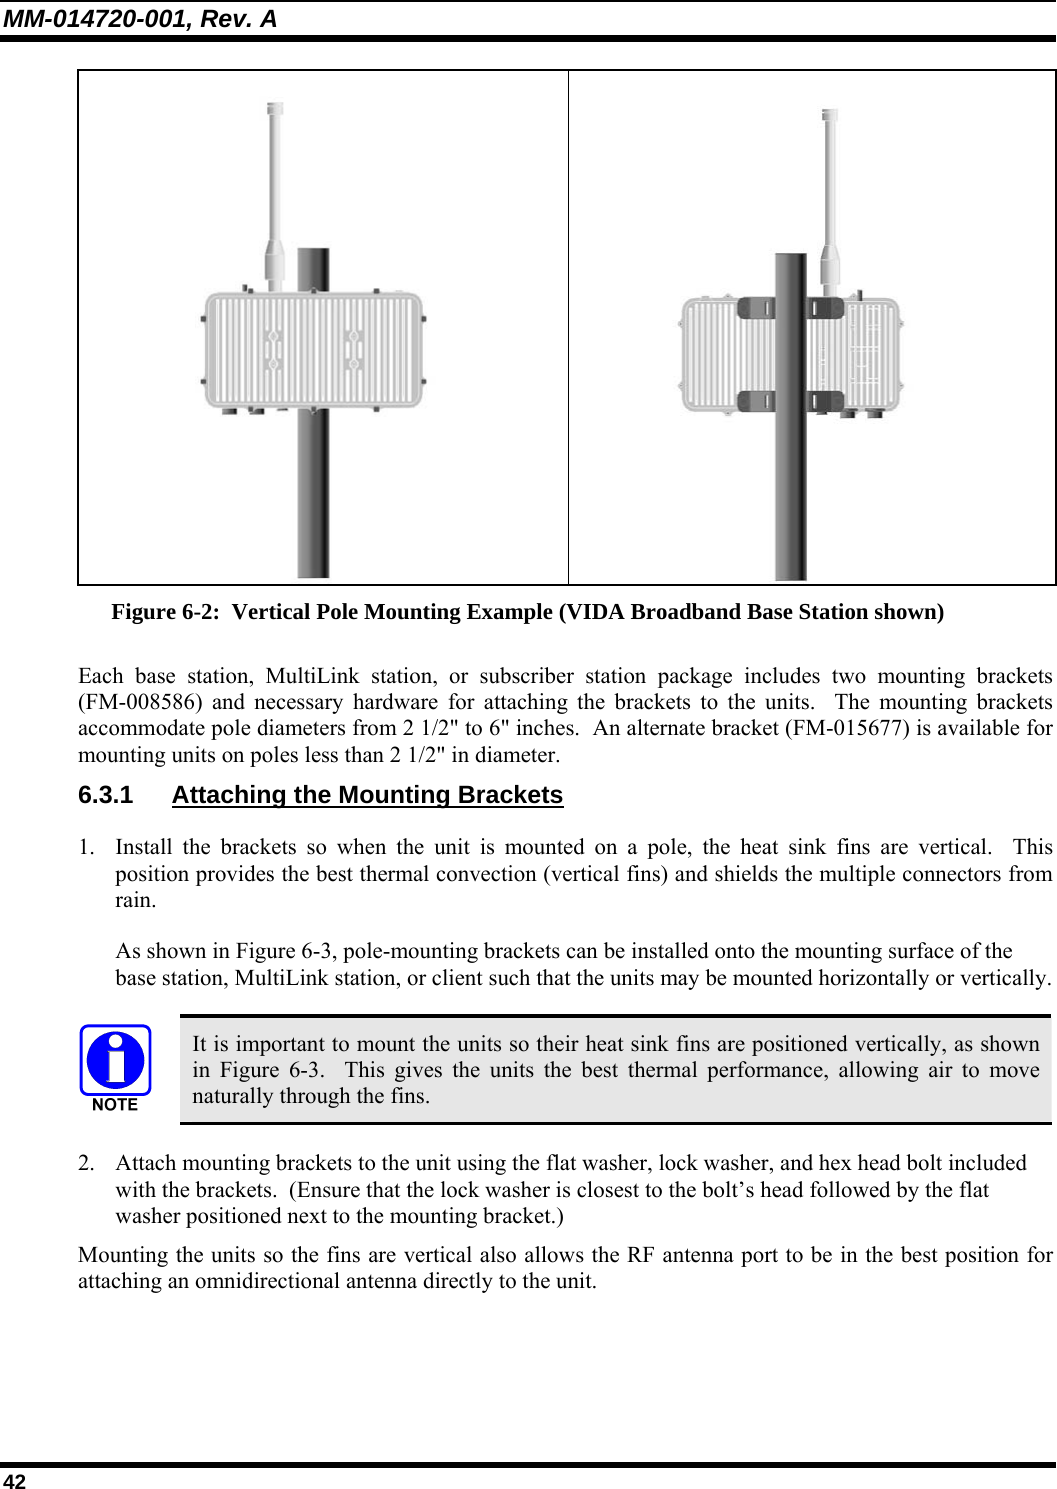 MM-014720-001, Rev. A 42   Figure 6-2:  Vertical Pole Mounting Example (VIDA Broadband Base Station shown) Each base station, MultiLink station, or subscriber station package includes two mounting brackets (FM-008586) and necessary hardware for attaching the brackets to the units.  The mounting brackets accommodate pole diameters from 2 1/2&quot; to 6&quot; inches.  An alternate bracket (FM-015677) is available for mounting units on poles less than 2 1/2&quot; in diameter. 6.3.1  Attaching the Mounting Brackets 1. Install the brackets so when the unit is mounted on a pole, the heat sink fins are vertical.  This position provides the best thermal convection (vertical fins) and shields the multiple connectors from rain. As shown in Figure 6-3, pole-mounting brackets can be installed onto the mounting surface of the base station, MultiLink station, or client such that the units may be mounted horizontally or vertically.   It is important to mount the units so their heat sink fins are positioned vertically, as shown in  Figure 6-3.  This gives the units the best thermal performance, allowing air to move naturally through the fins. 2. Attach mounting brackets to the unit using the flat washer, lock washer, and hex head bolt included with the brackets.  (Ensure that the lock washer is closest to the bolt’s head followed by the flat washer positioned next to the mounting bracket.) Mounting the units so the fins are vertical also allows the RF antenna port to be in the best position for attaching an omnidirectional antenna directly to the unit.  